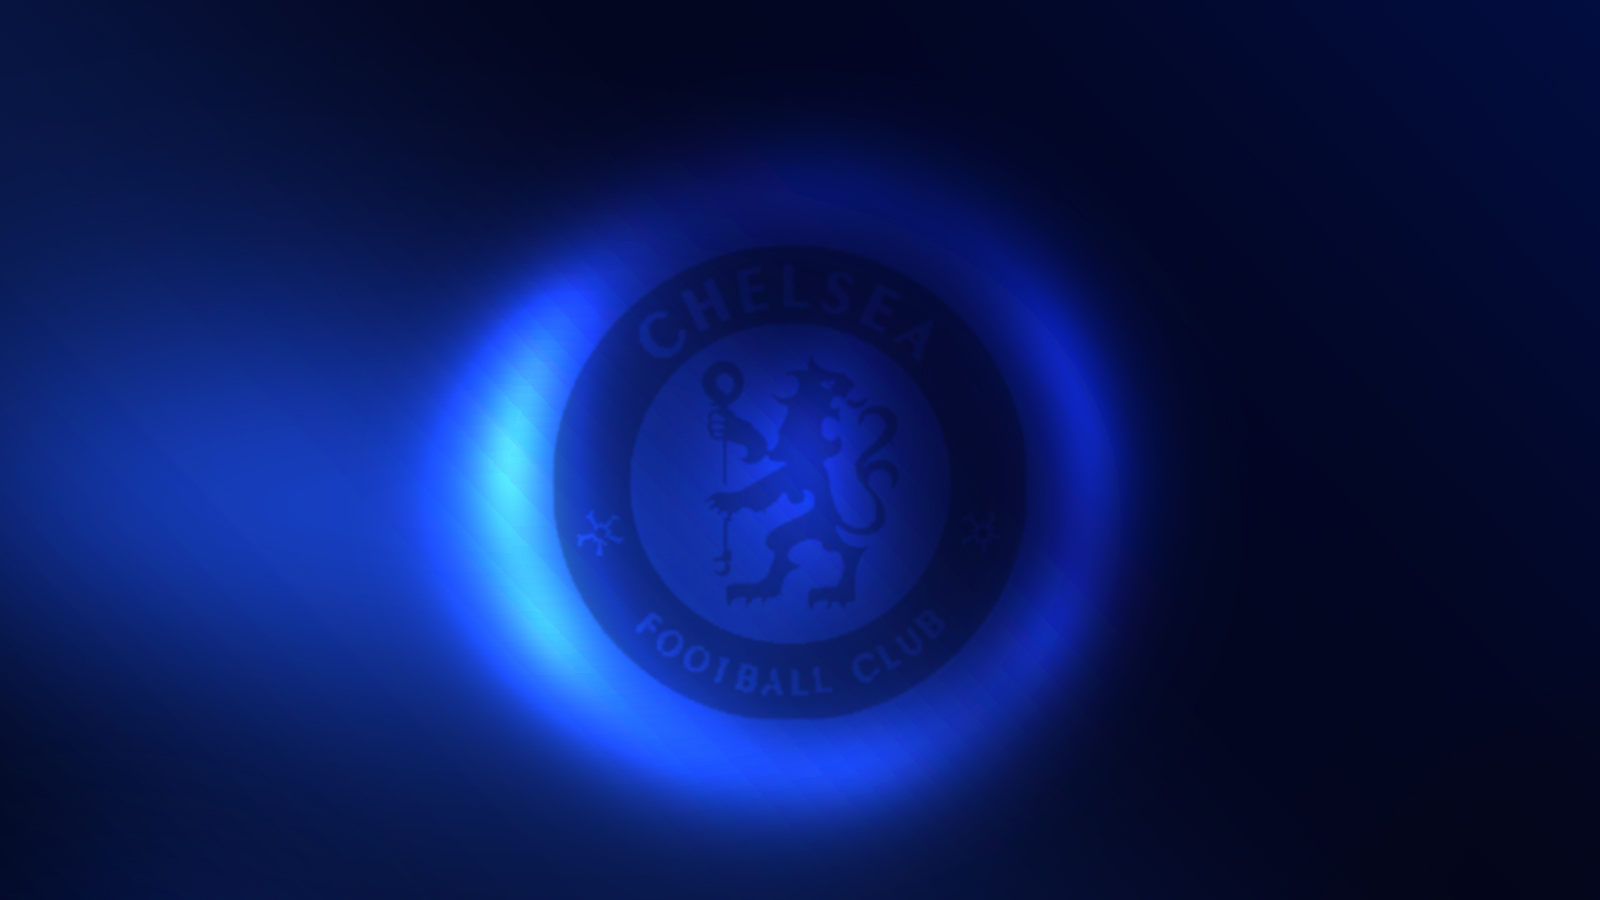 Free download chelsea wallpaper logo download is high definition wallpaper you [1600x900] for your Desktop, Mobile & Tablet. Explore Cool Chelsea Wallpaper. Chelsea Fc Logo Wallpaper, Chelsea Logo Wallpaper